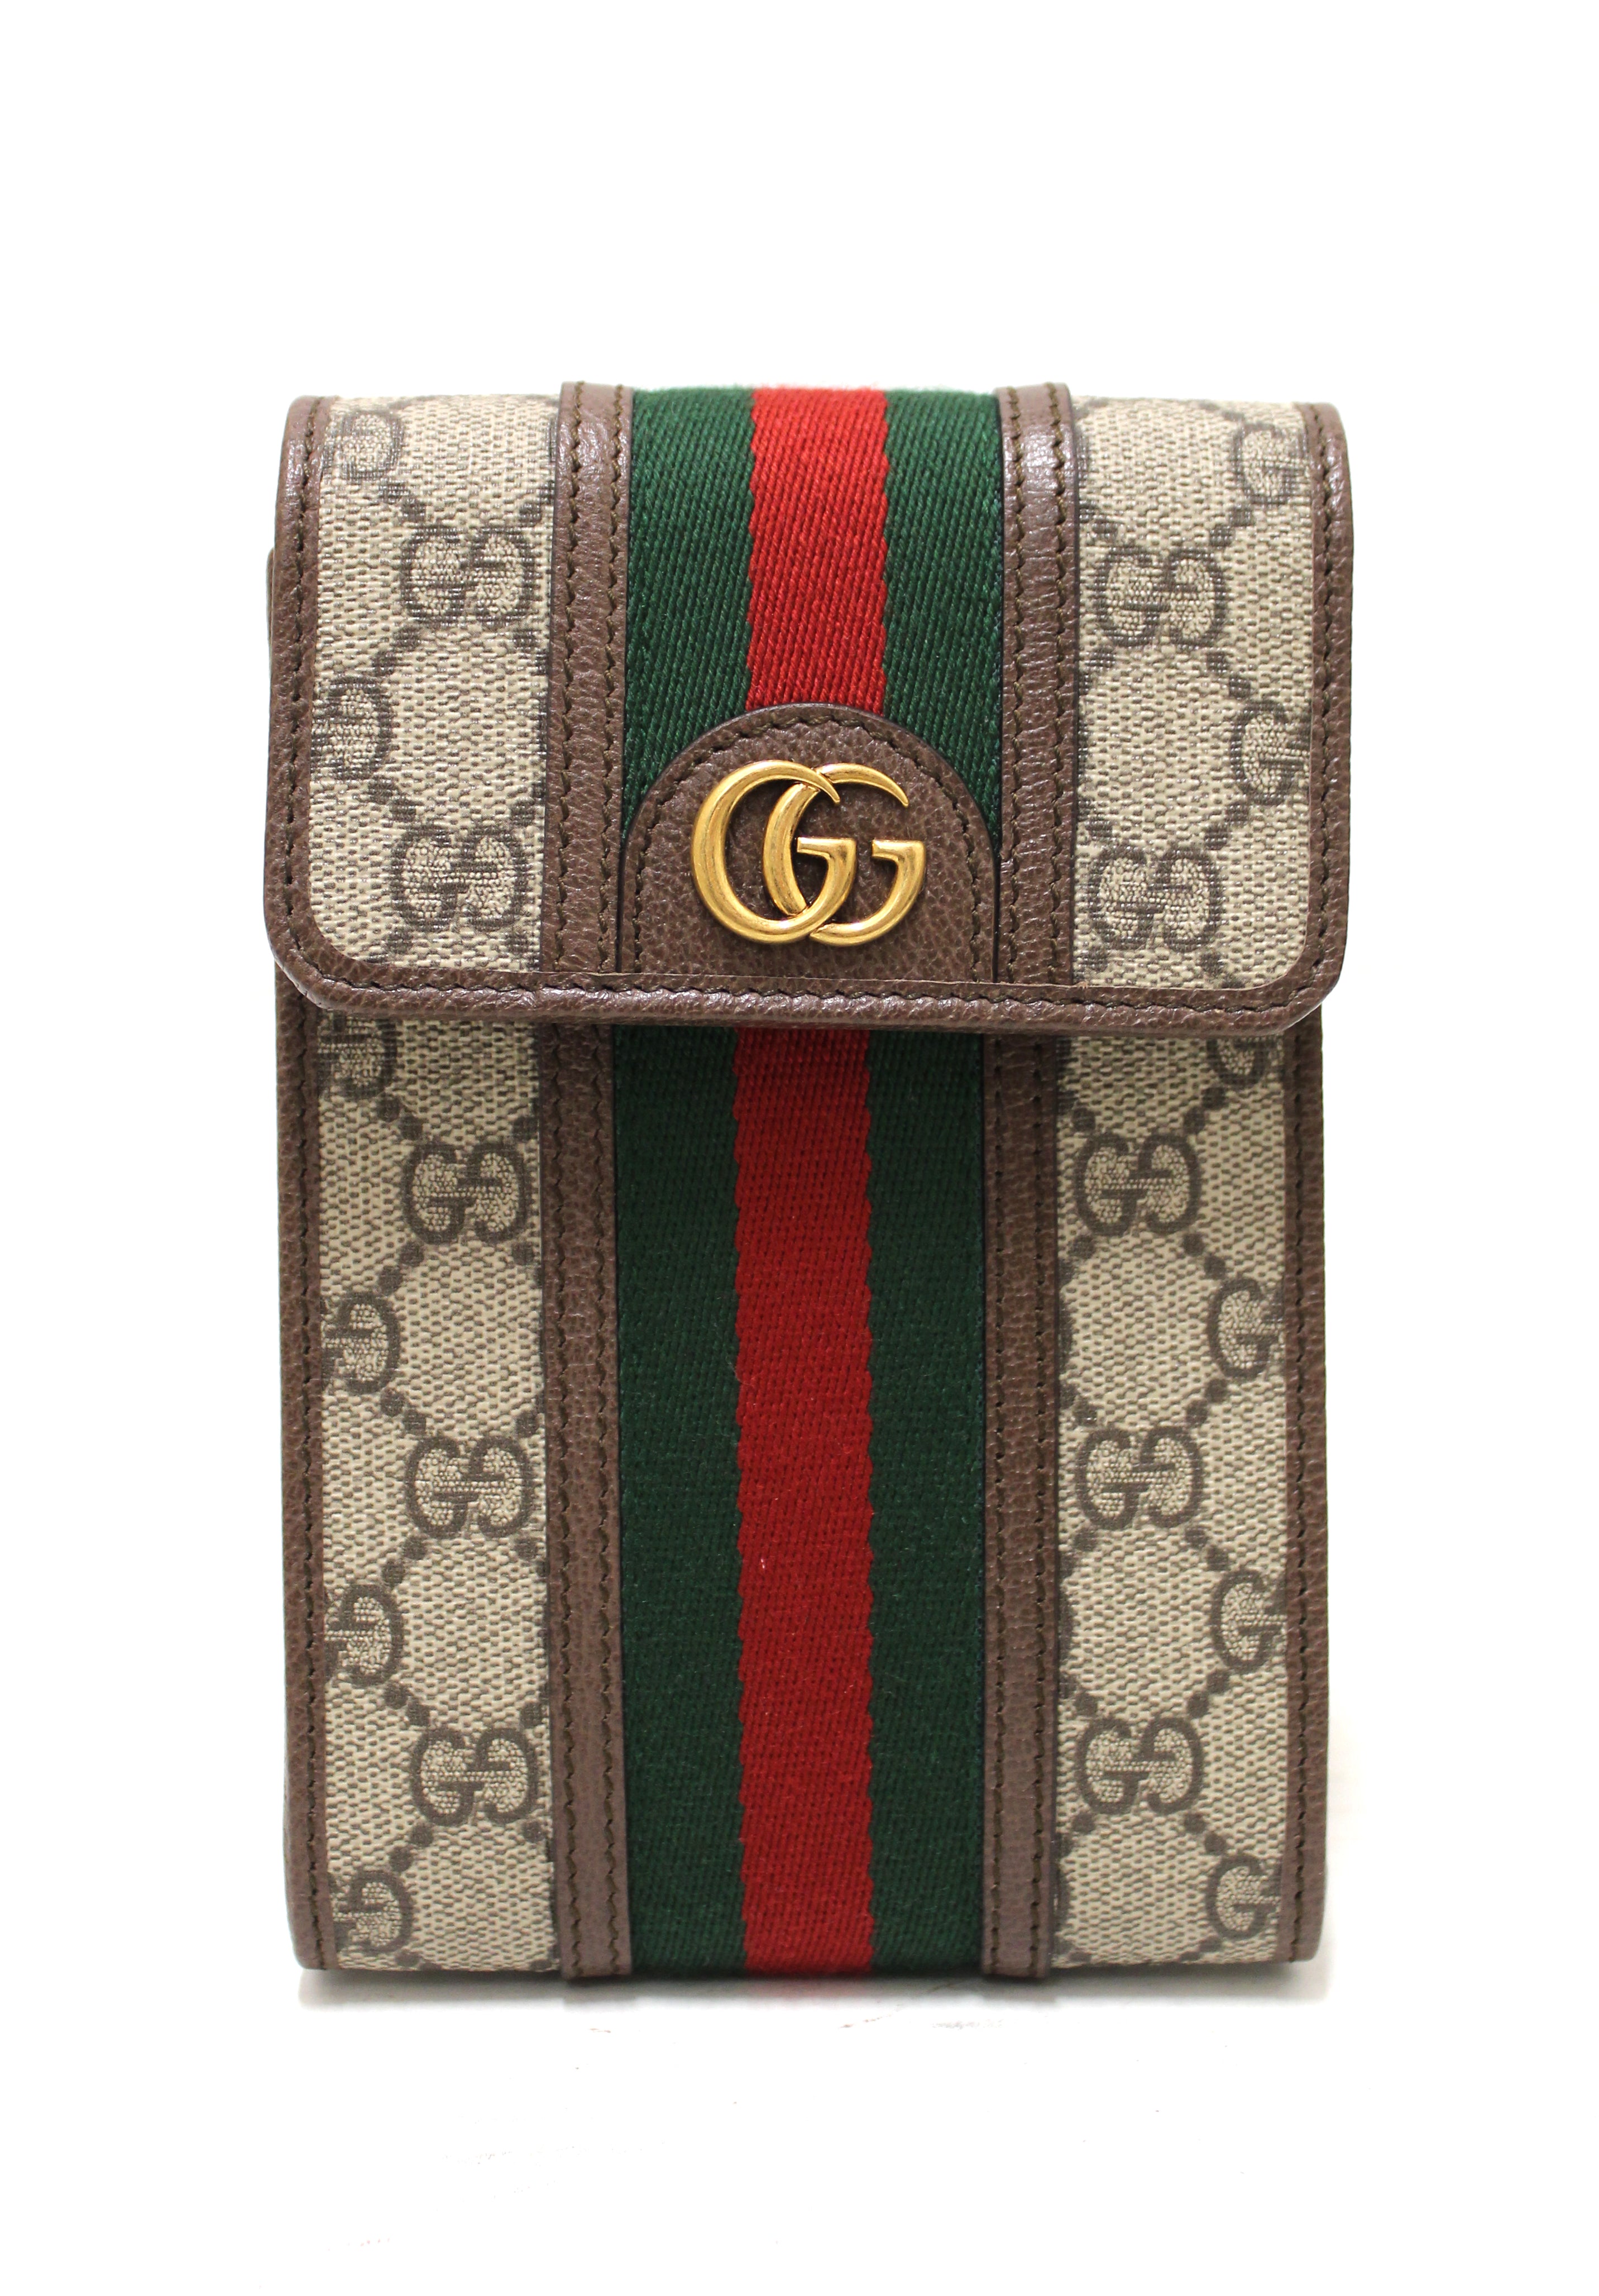 Gucci Ophidia gg Supreme Crossbody Bag in Blue for Men